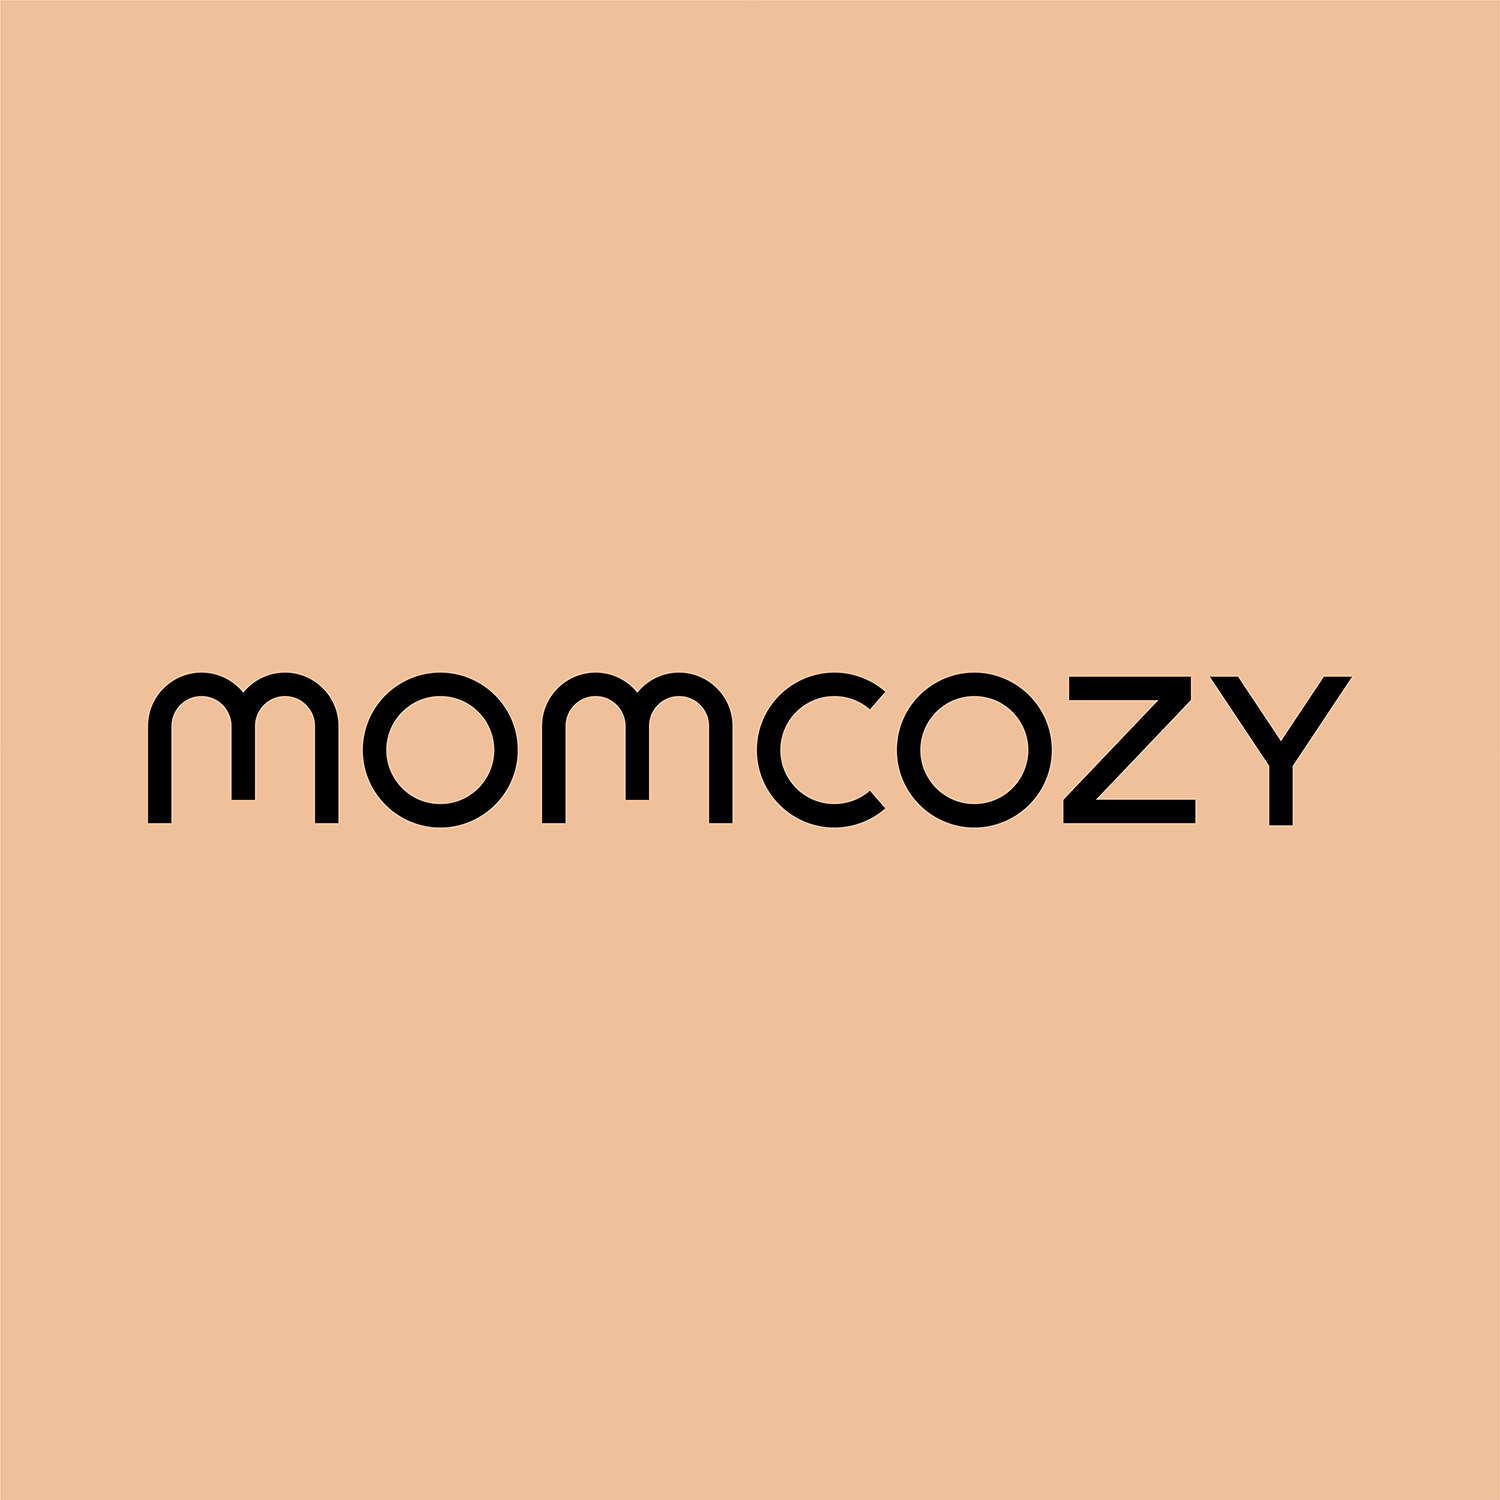 Momcozy Kneading Lactation Massager with Heat, 1 Pack